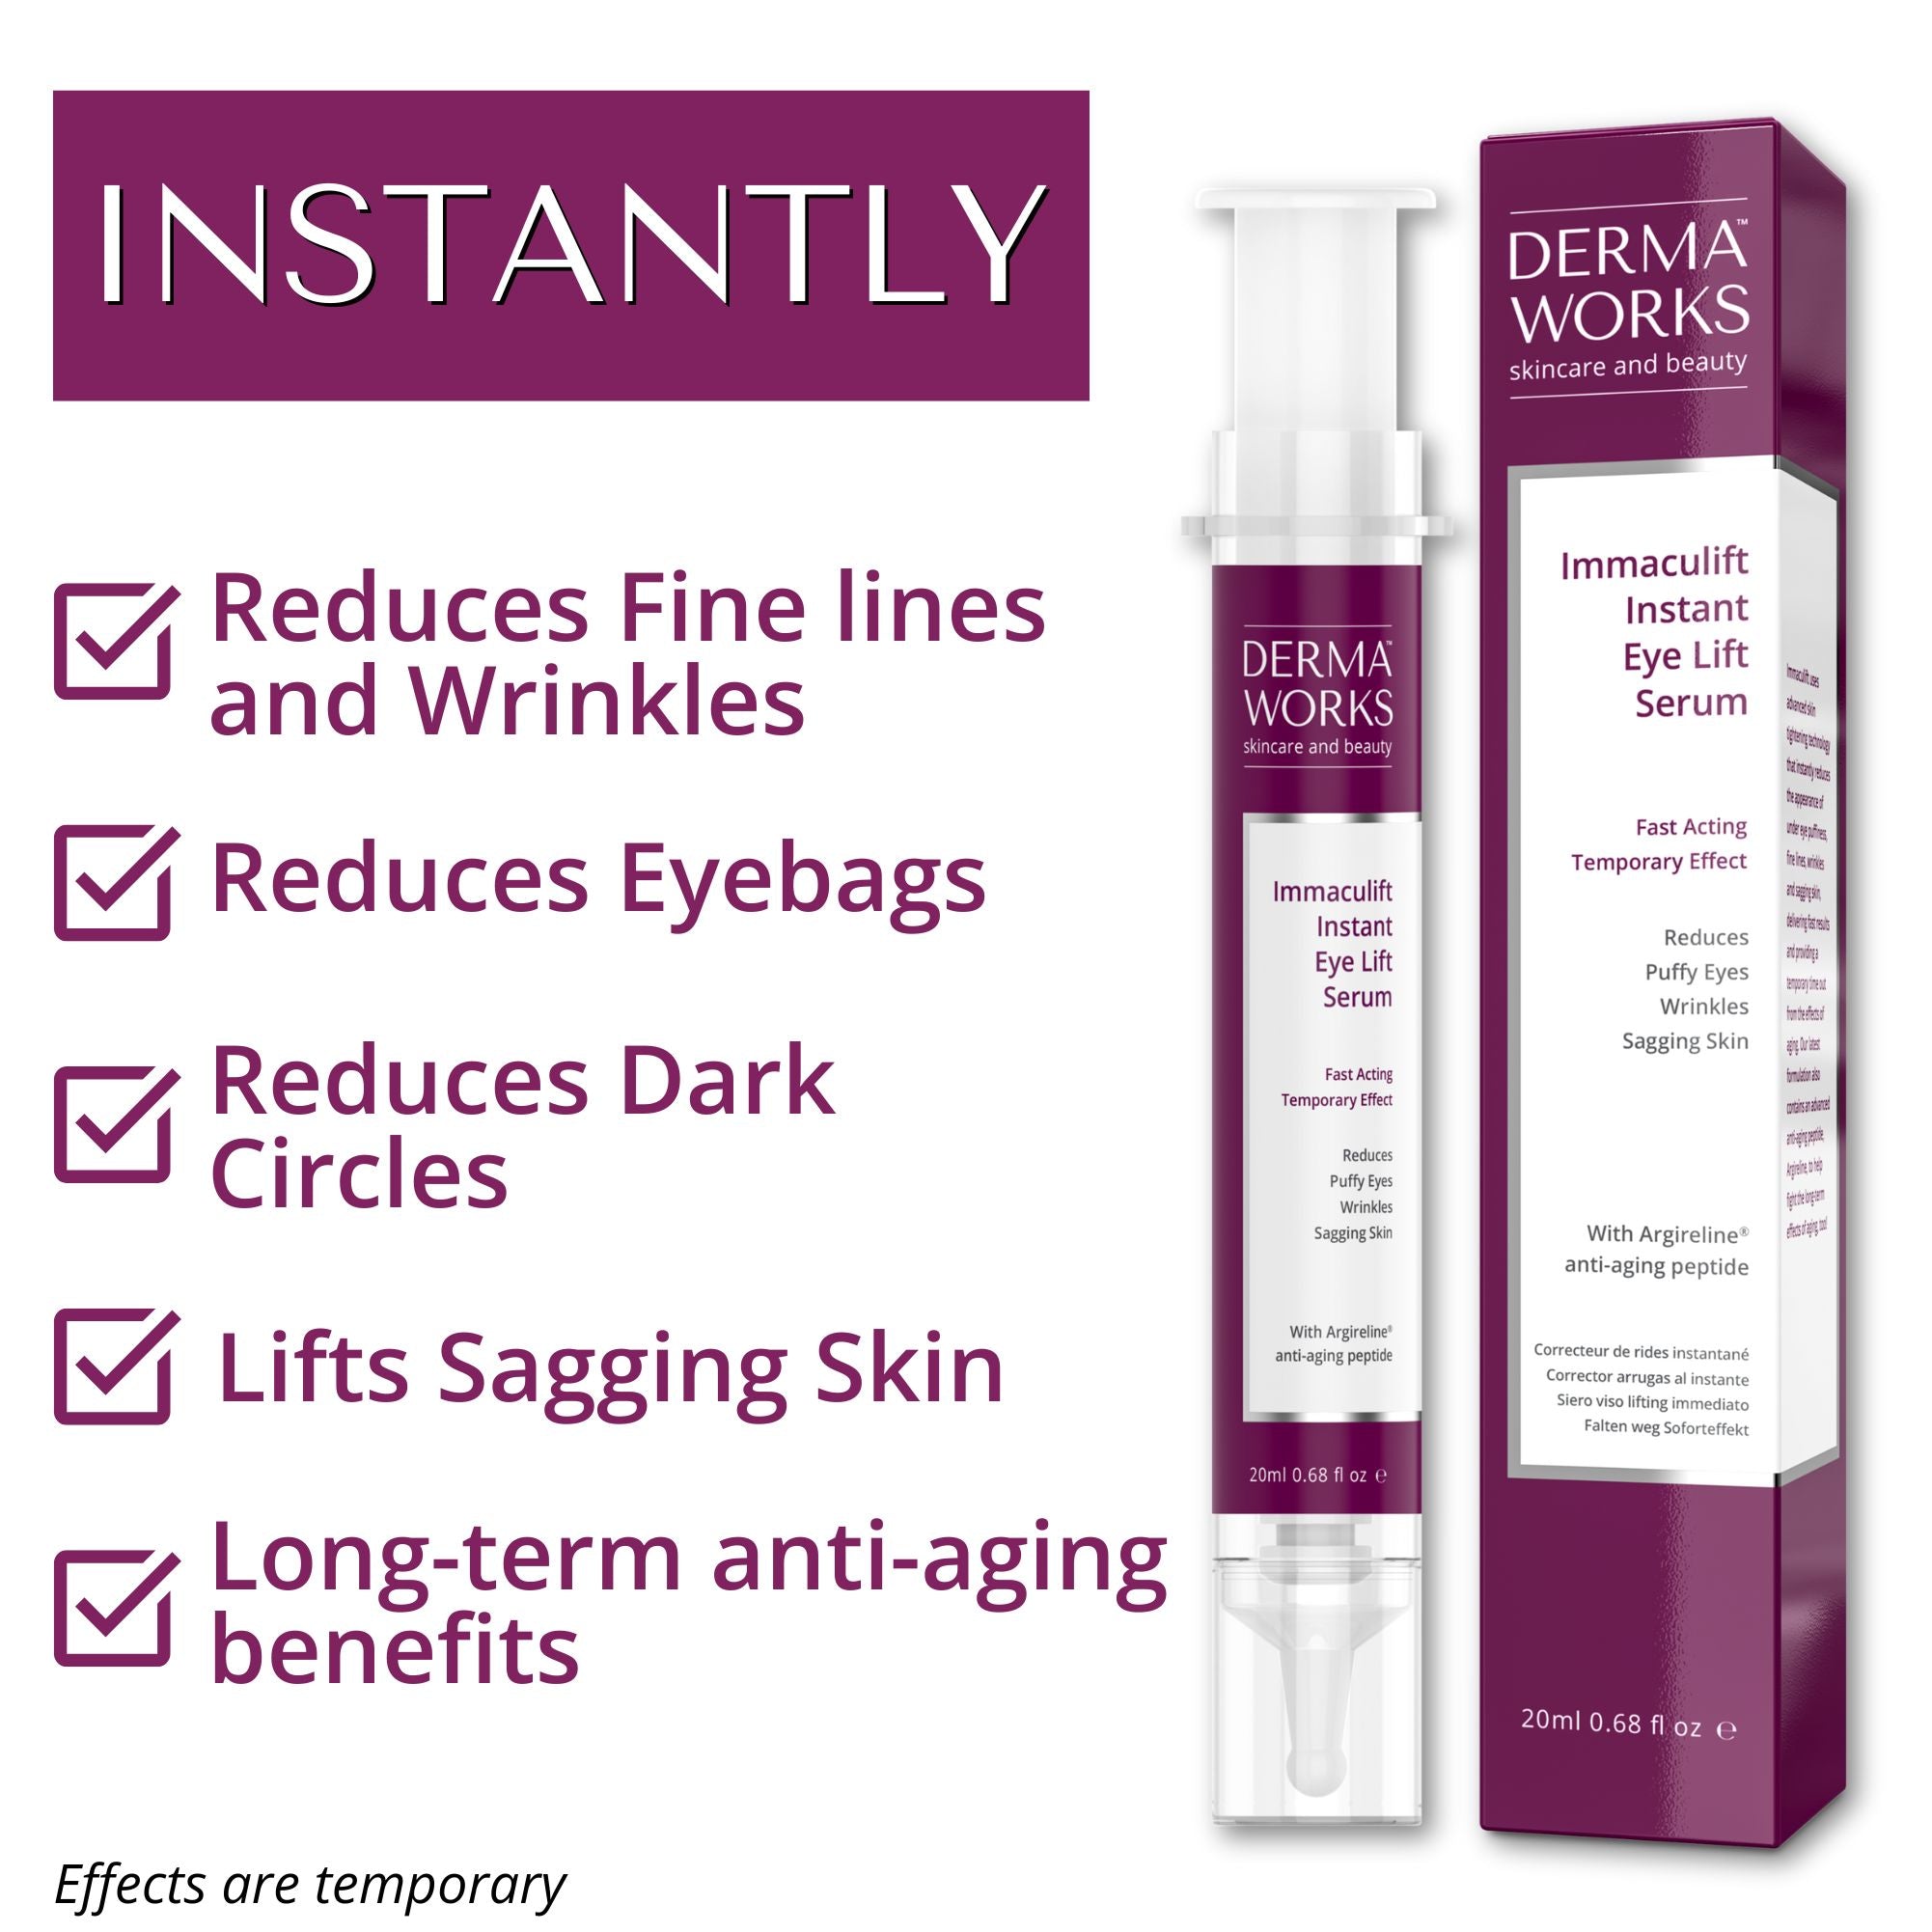 Immaculift instantly reduces fine lines and wrinkles, eye bags, dark circles, and lifts sagging skin. Contains Argireline.